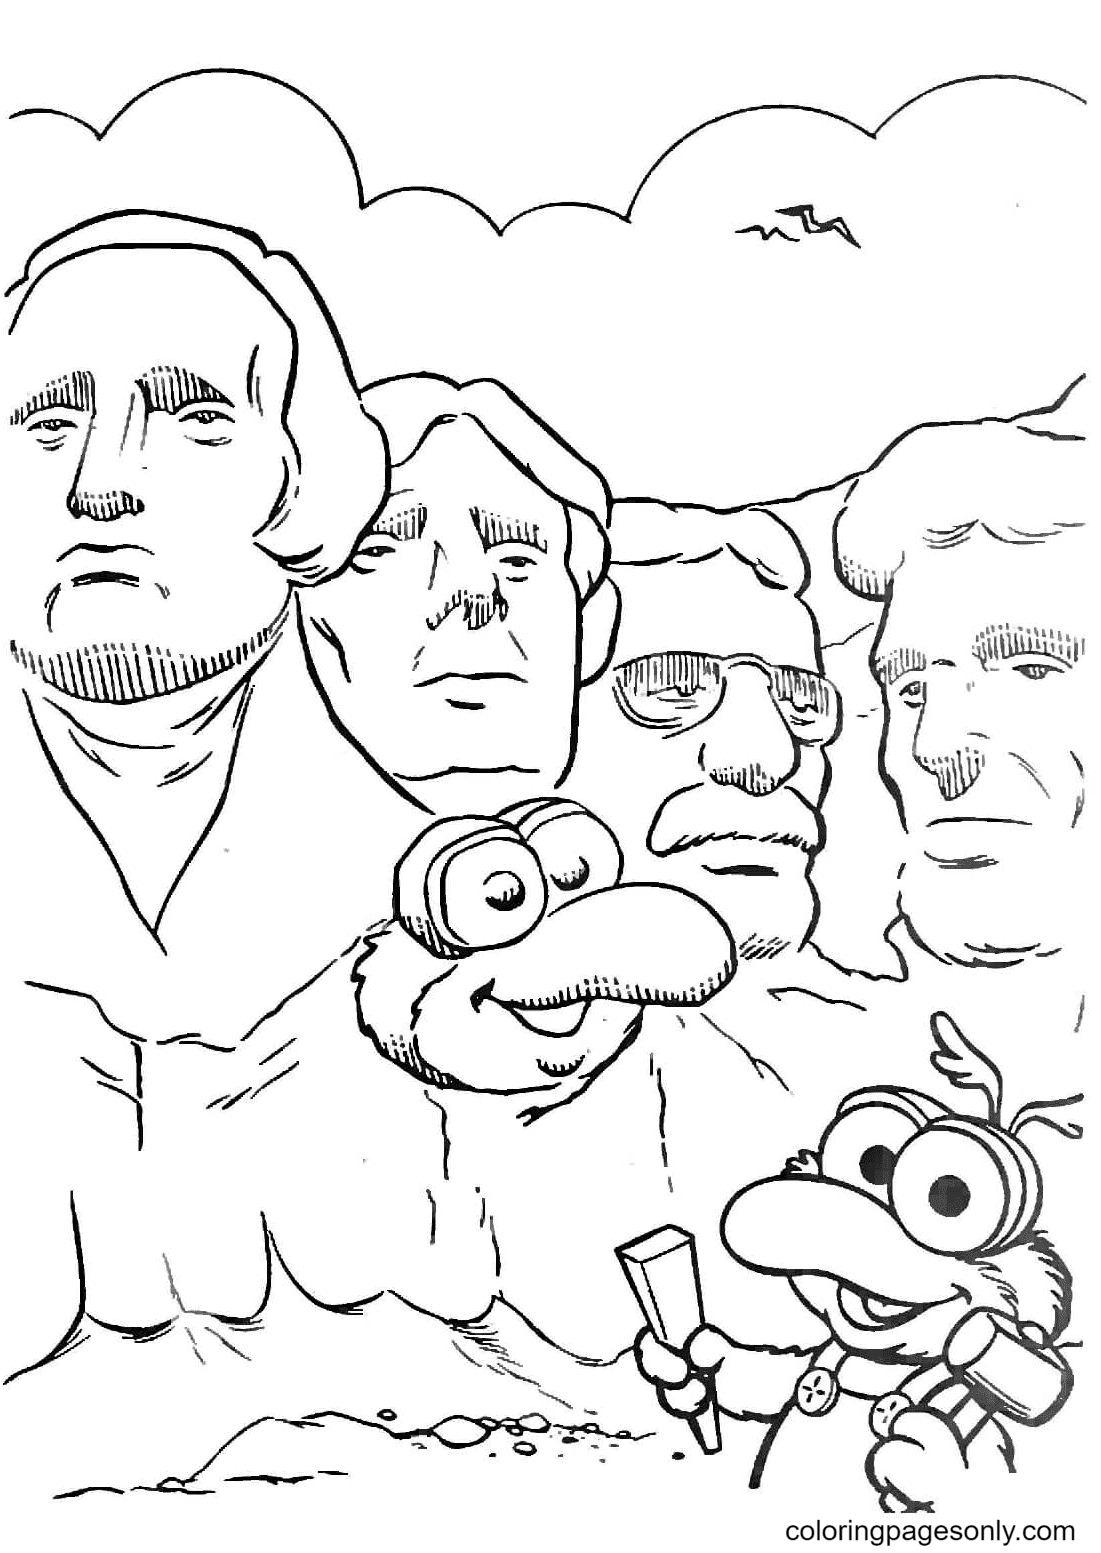 Baby Gonzo and Mount Rushmore National Memorial Coloring Page